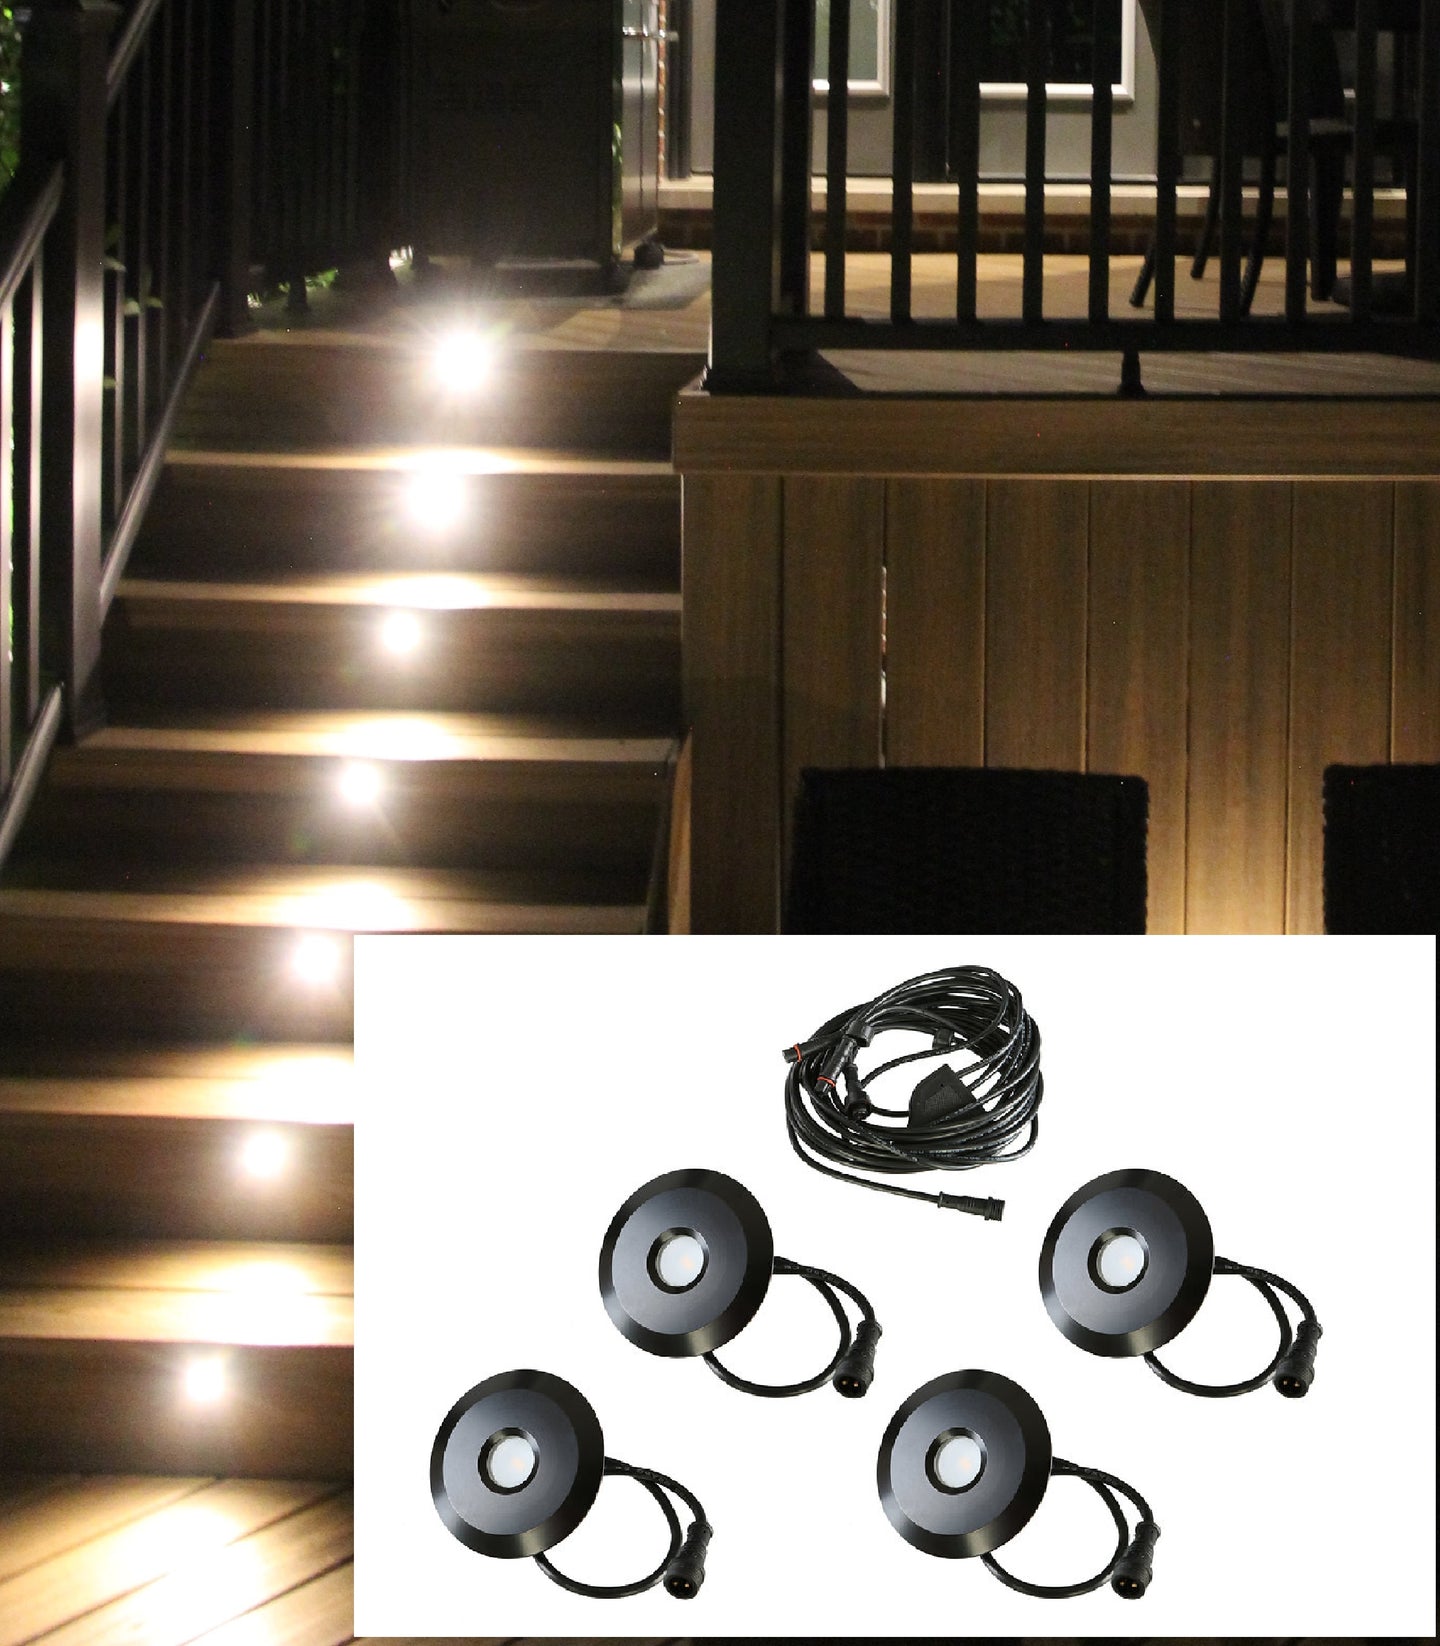 BIG Round Metal Trim - LED Outdoor Recessed Lights KIT - 4 Mini Deck/Patio Lights 0.5W (Spring Fit) with Daisy Chain - #EZKITBRT4